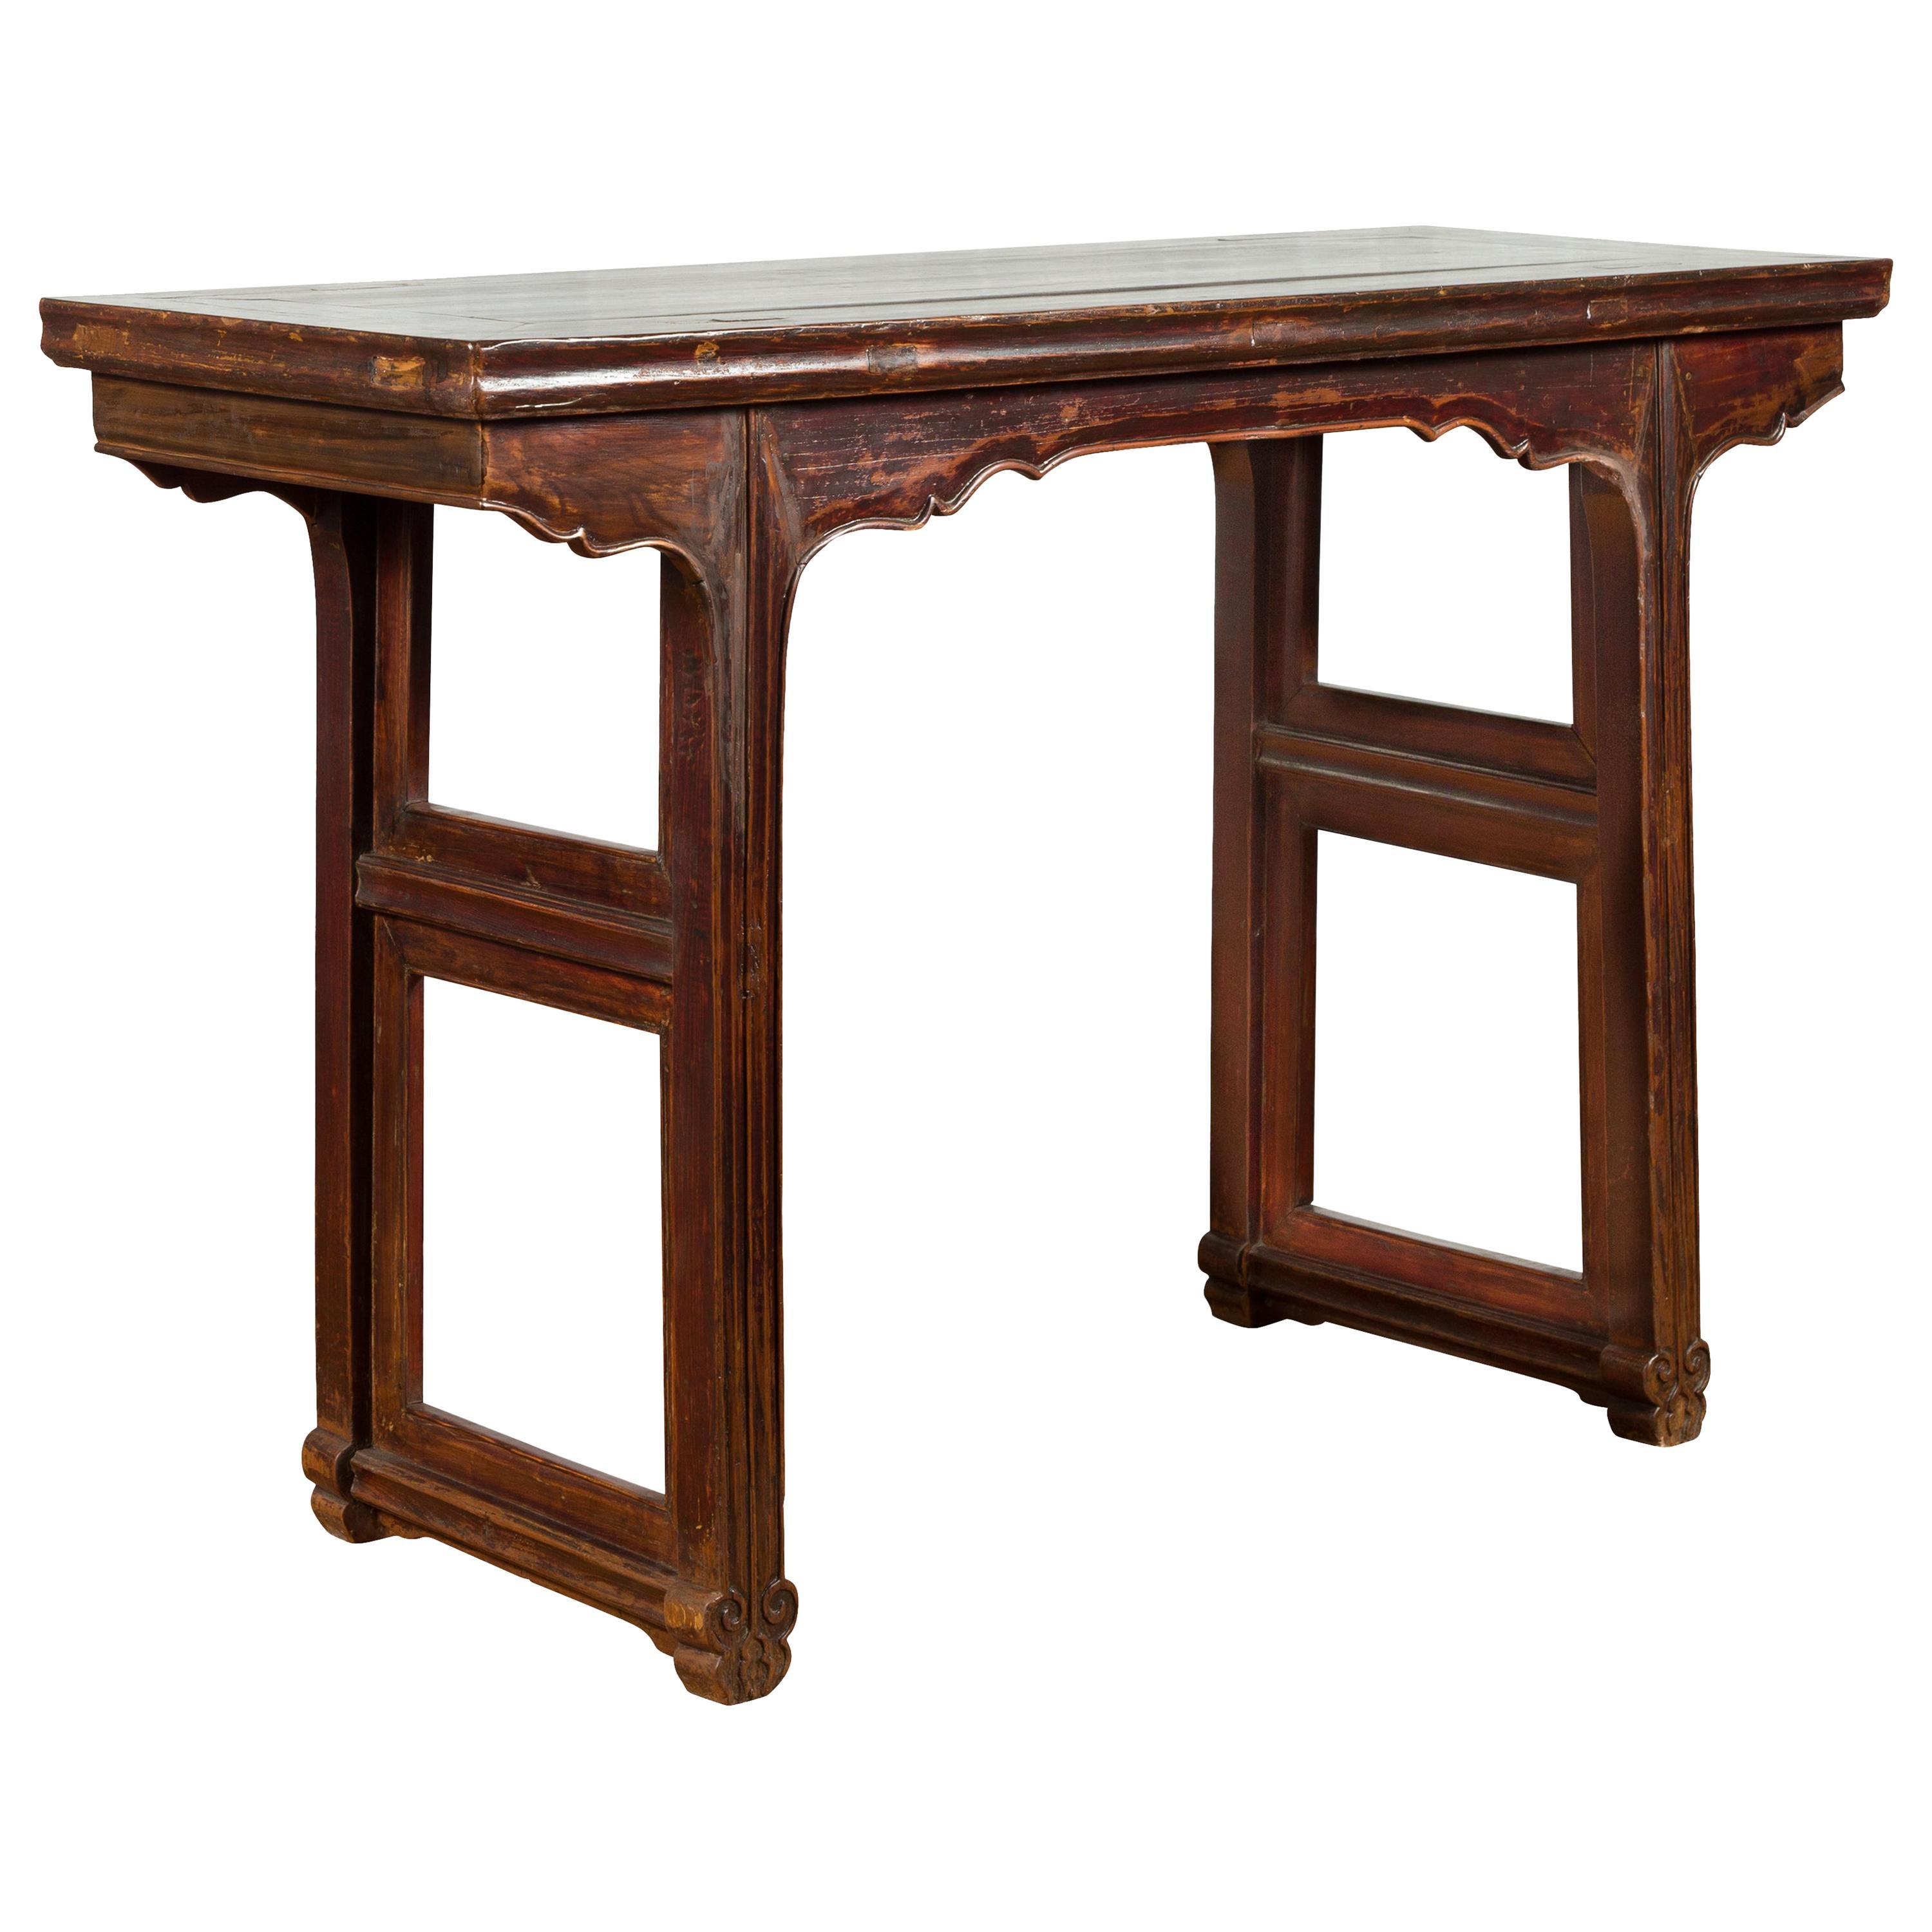 Chinese Qing Dynasty Period 19th Century Altar Console Table with Carved Apron